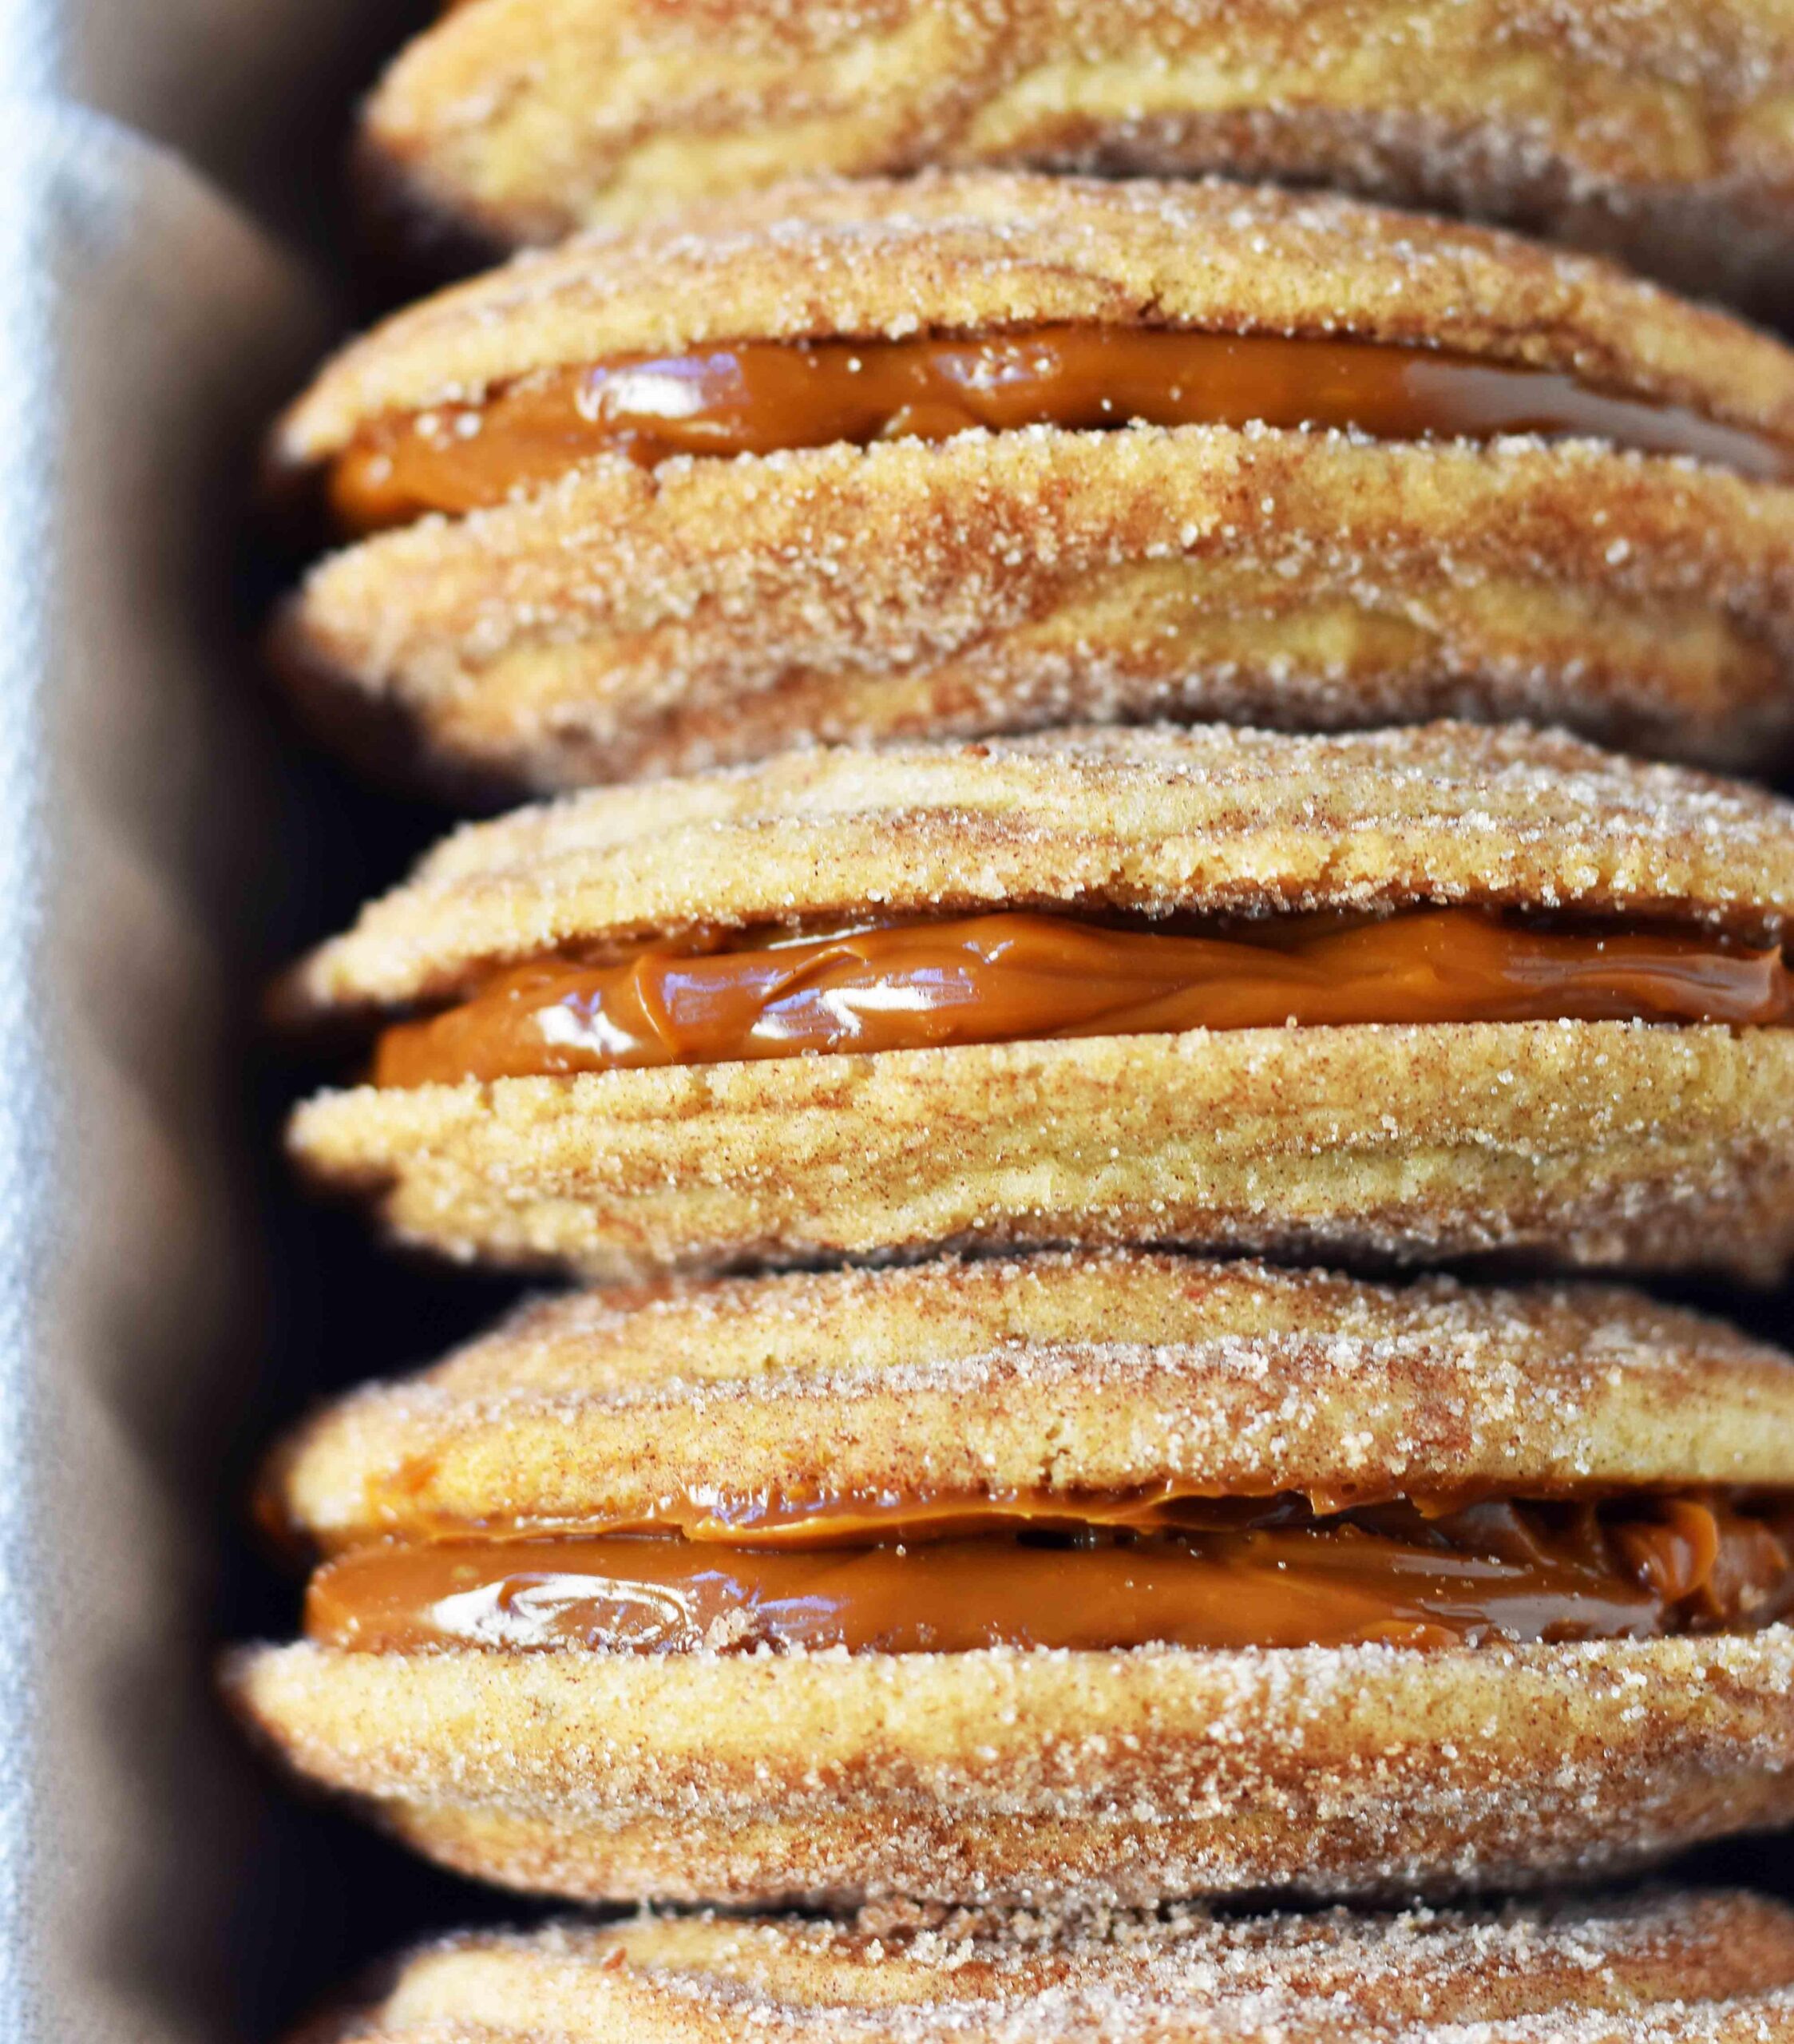  These cookies are guaranteed to satisfy your cravings for something sweet and decadent.